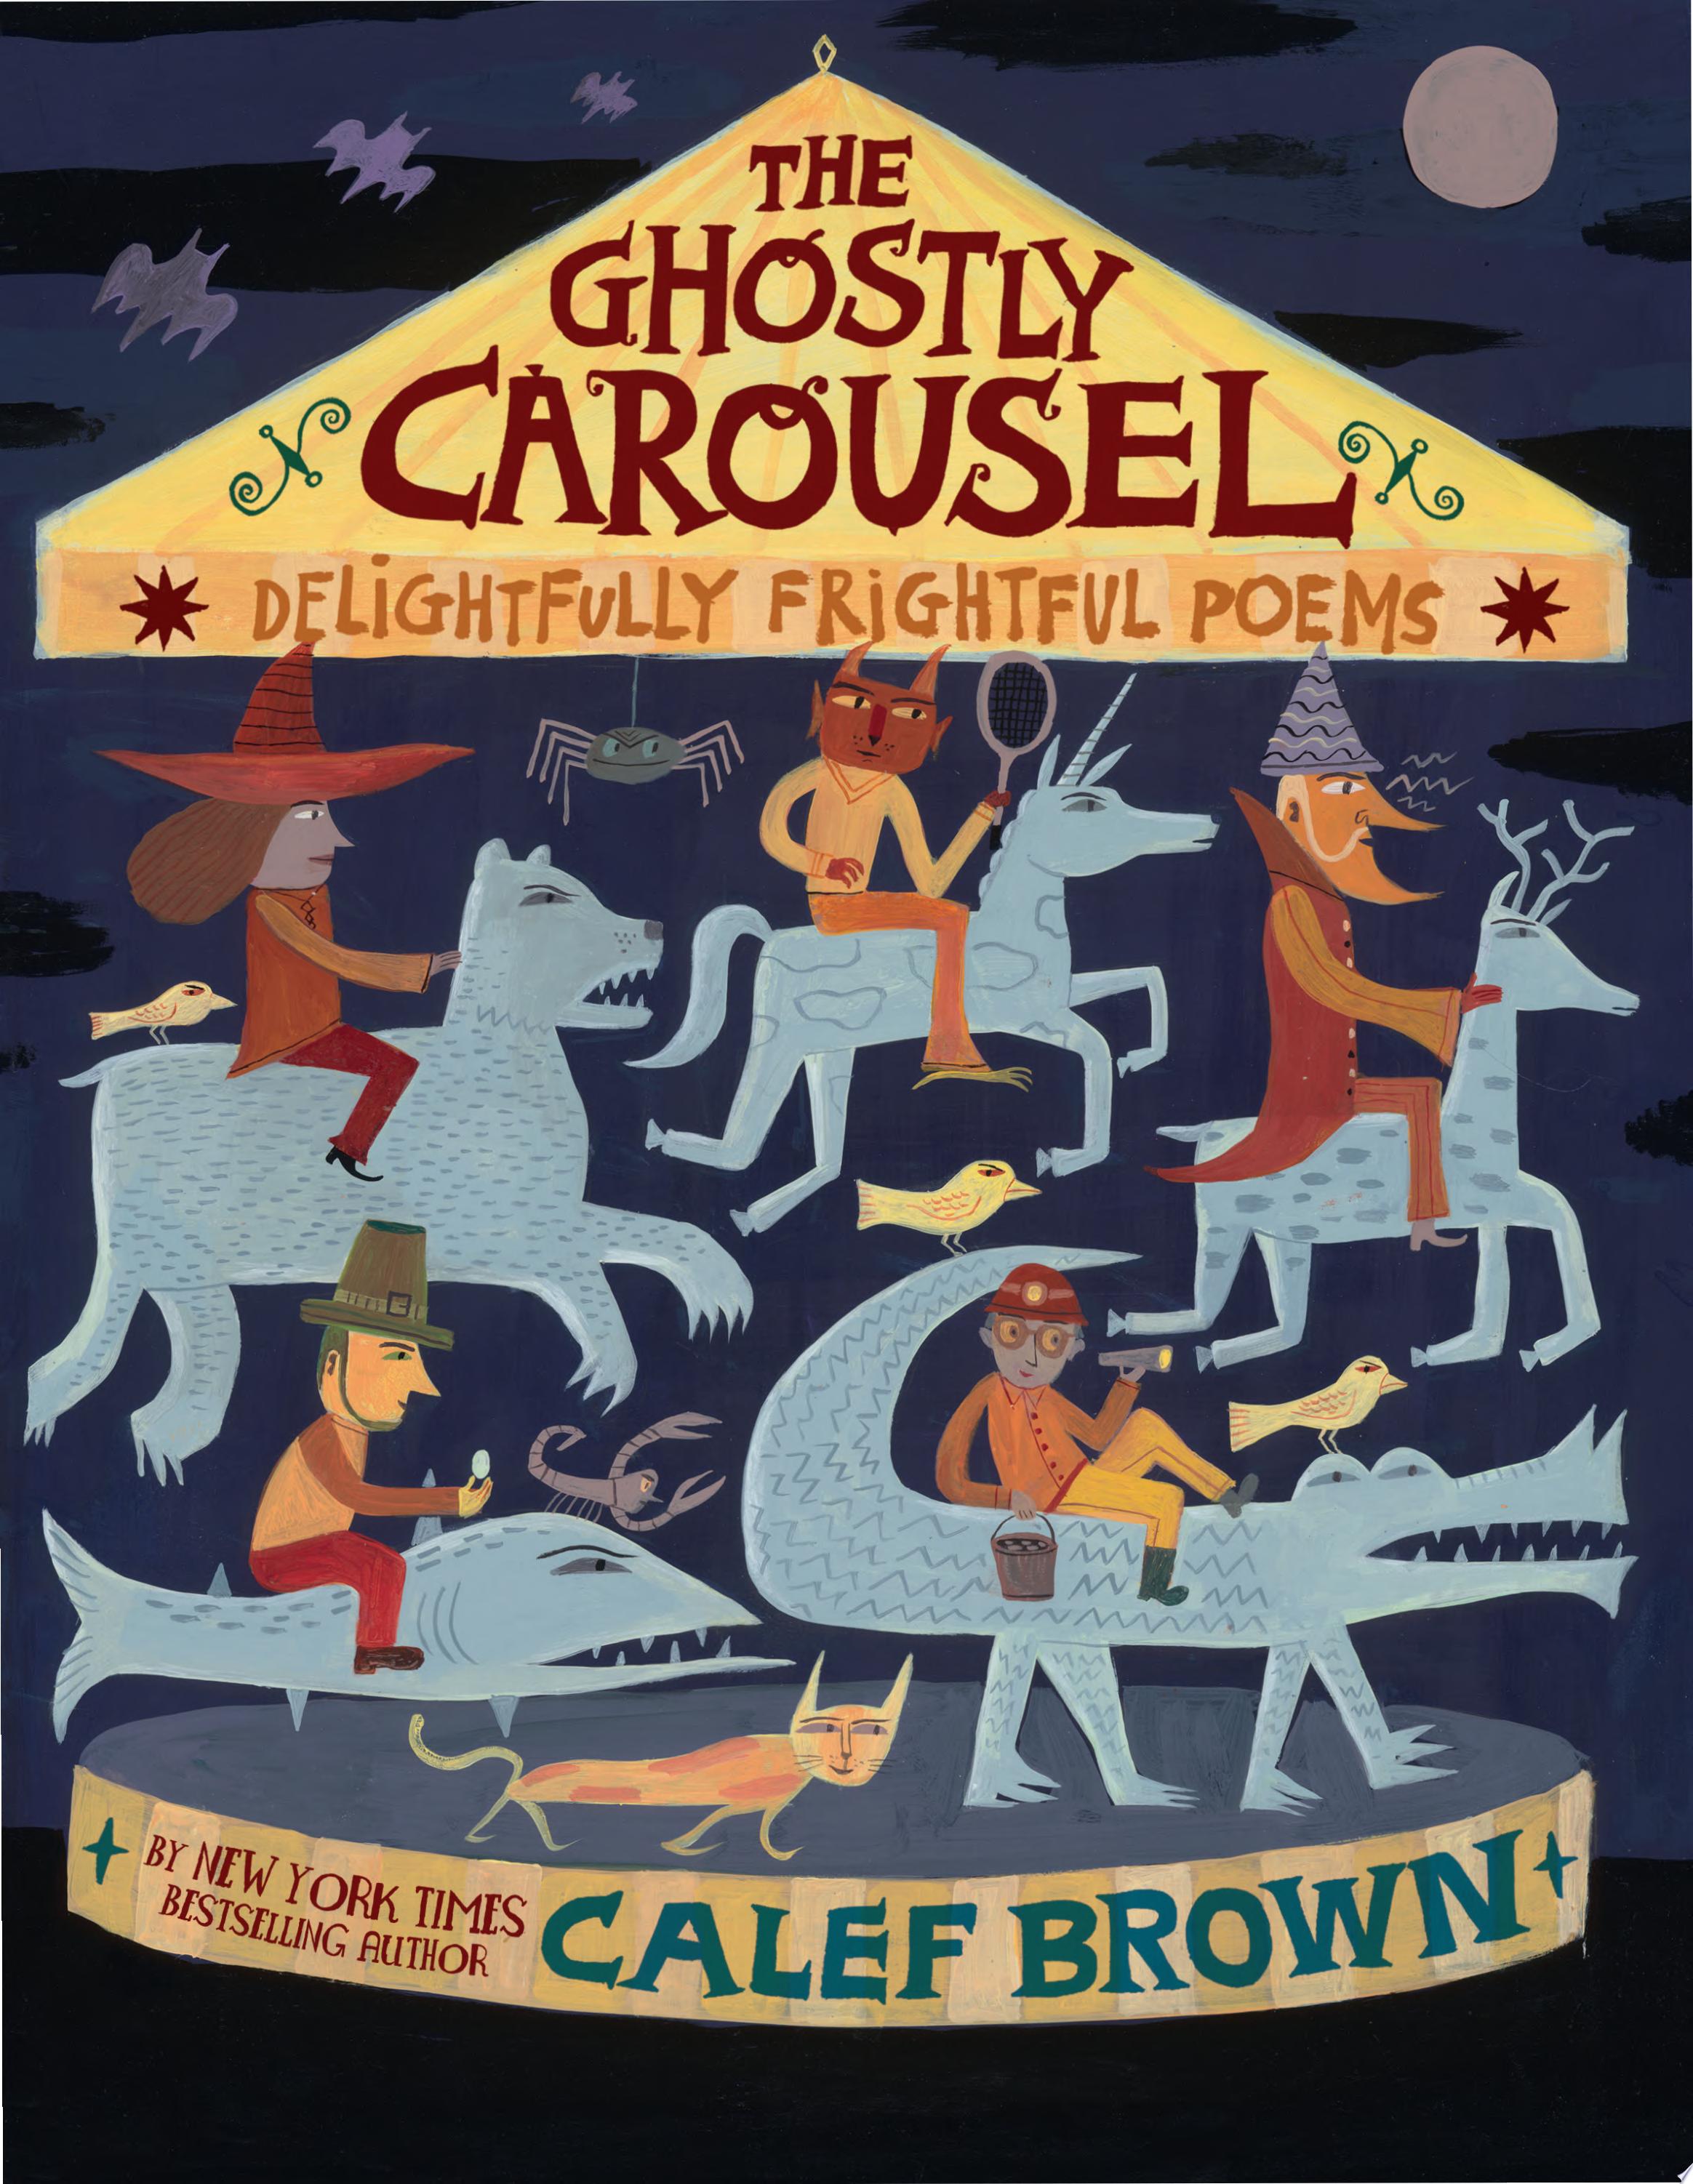 Image for "The Ghostly Carousel: delightfully frightful poems"